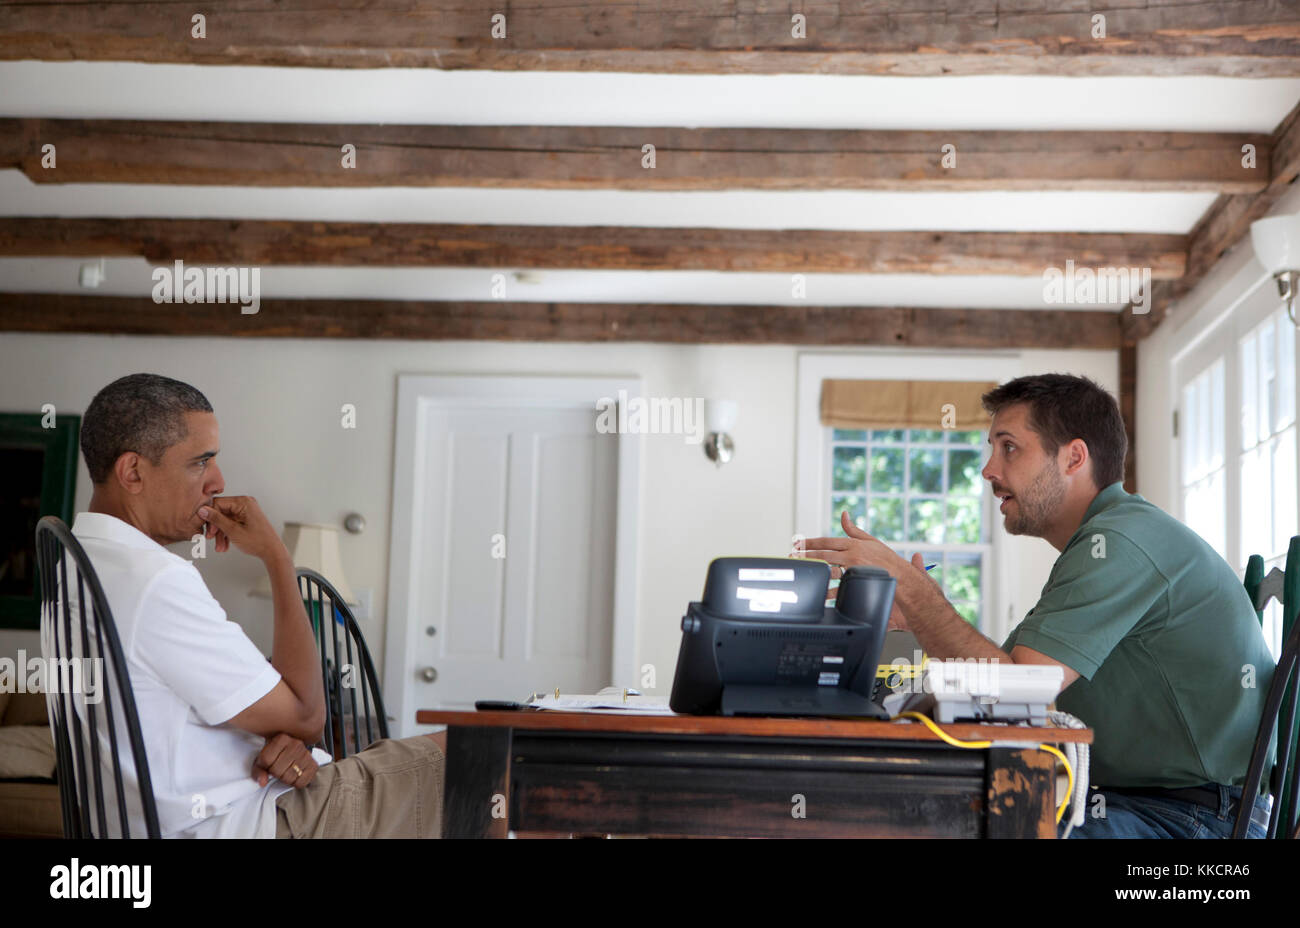 President Barack Obama receives an economic briefing from Brian Deese, Deputy Director of the National Economic Council, at the Fisher House at Blue Heron Farm in Chilmark, Massachusetts, August 24, 2011. Stock Photo